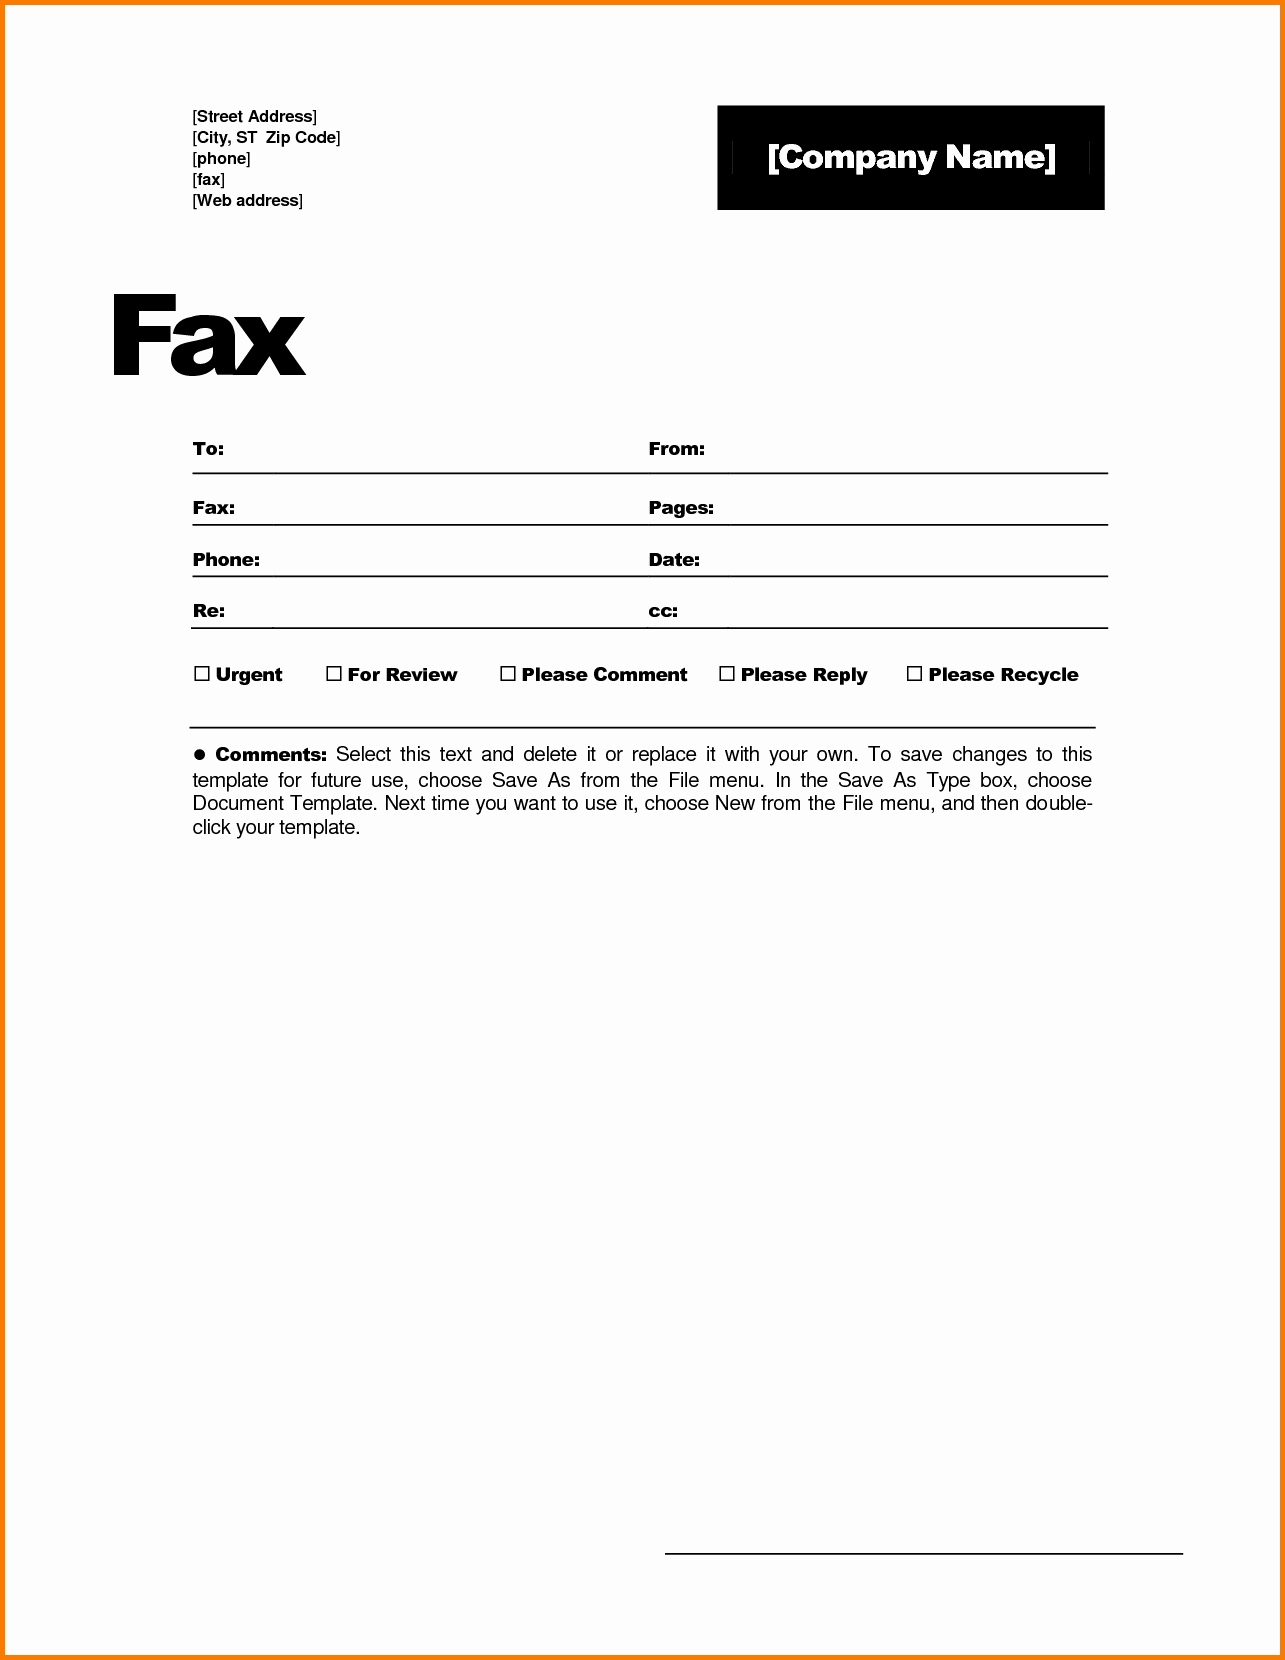 Fax Cover Sheet Sample Template Beautiful 6 Fax Cover Sheet Medical